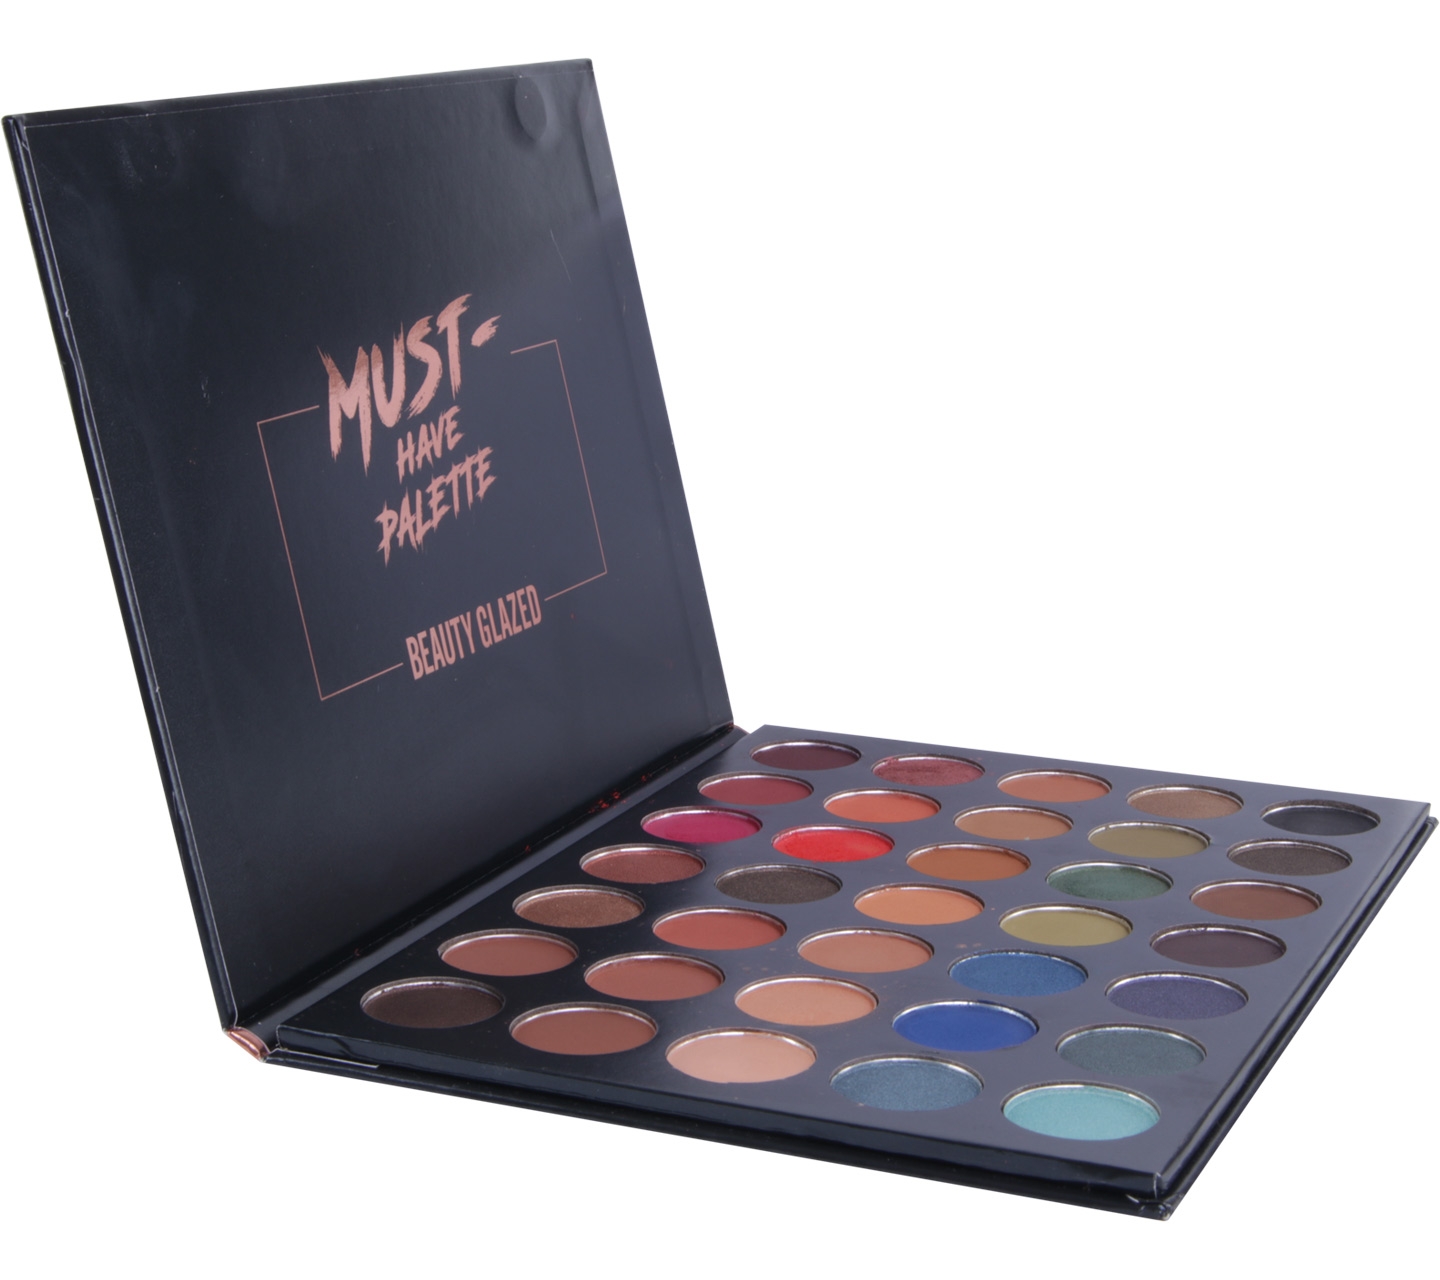 Beauty Glazed Eyeshadow Must-Have Sets and Palette